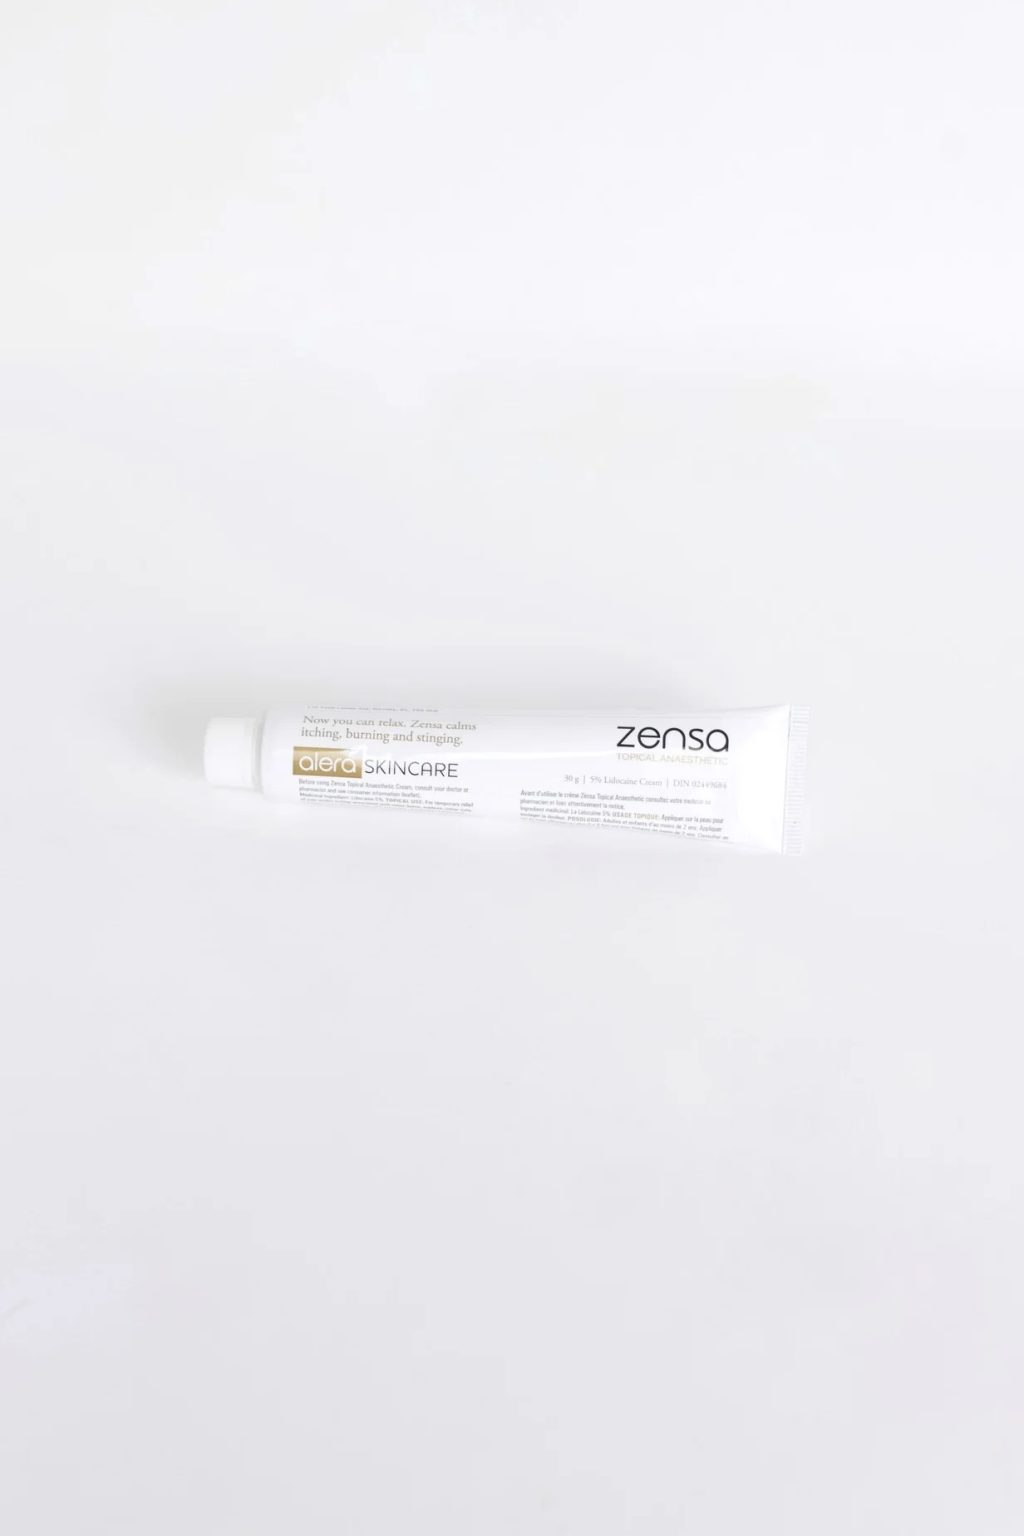 Pain-Free Perfection: Discover The Magic Of Zensa Lidocaine